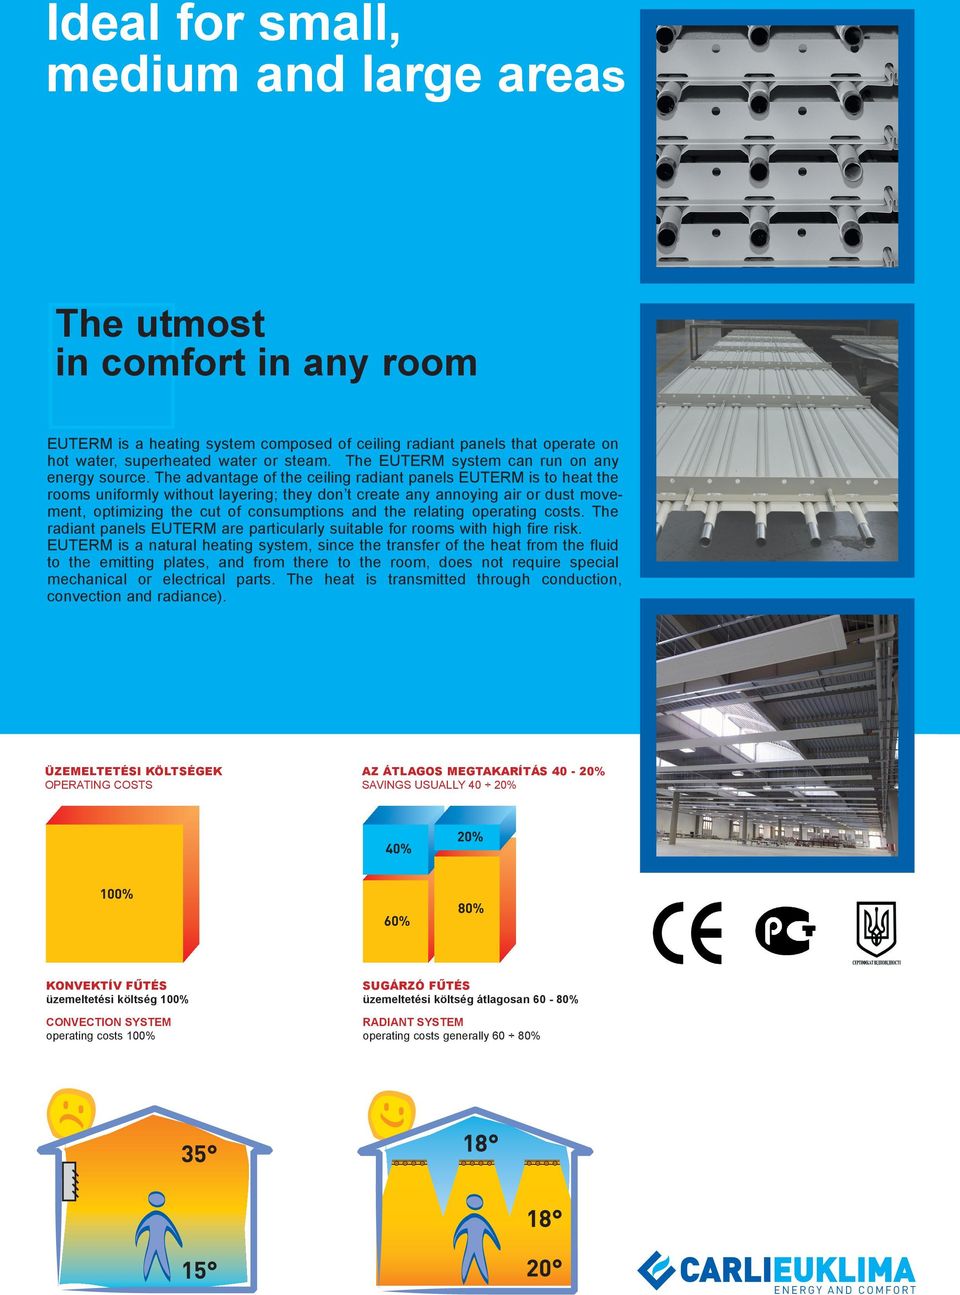 The advantage of the ceiling radiant panels EUTERM is to heat the rooms uniformly without layering; they don t create any annoying air or dust movement, optimizing the cut of consumptions and the